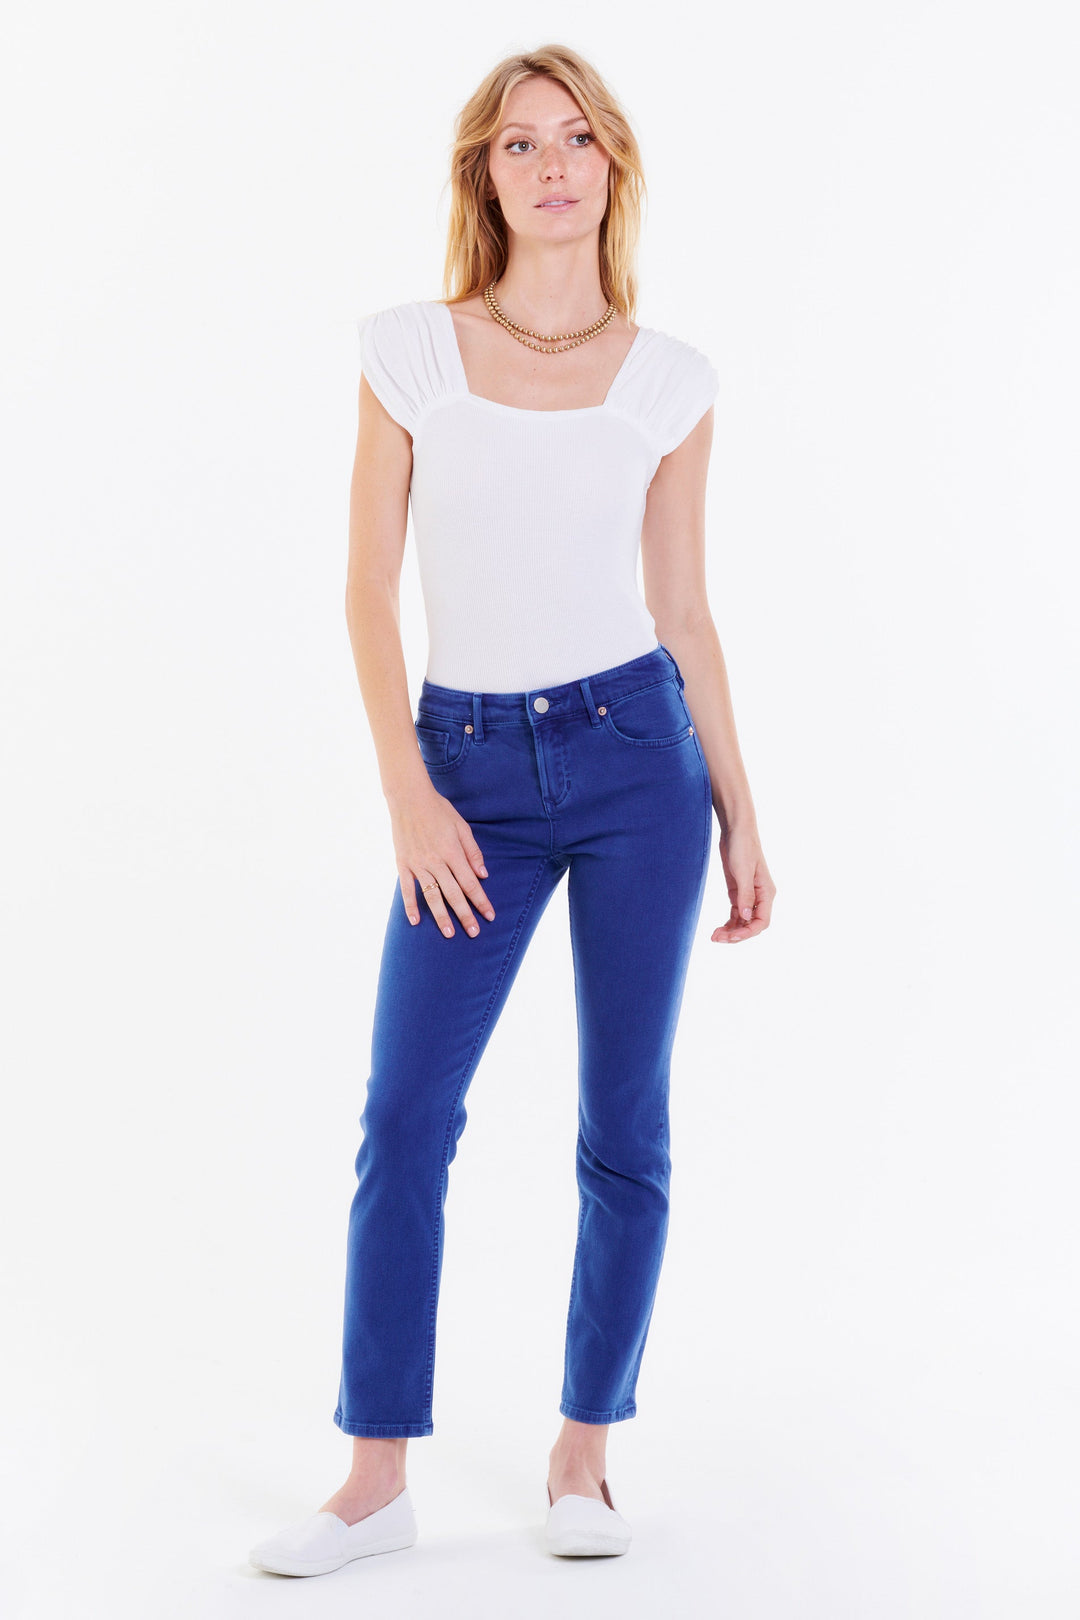 image of a female model wearing a BLAIRE HIGH RISE ANKLE SLIM STRAIGHT LEG JEANS NAUTICAL BLUE JEANS